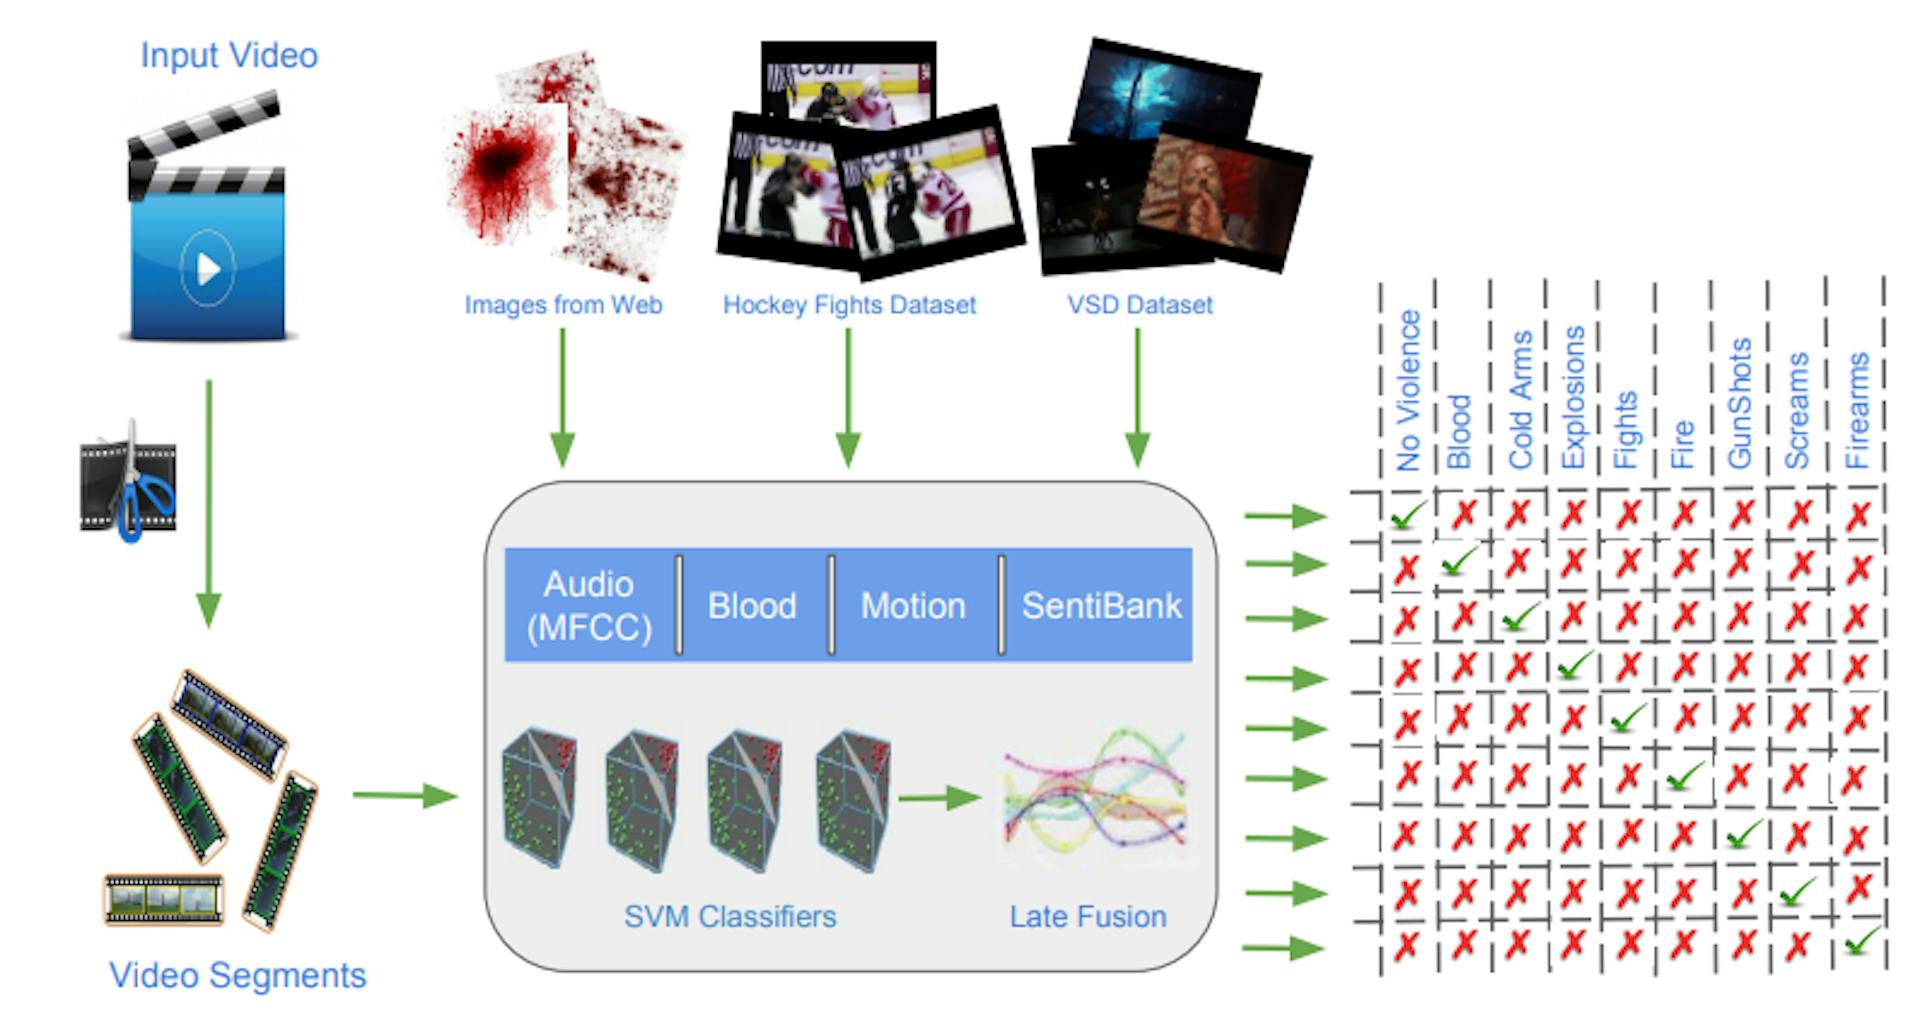 Figure 3.1: Figure showing the overview of the system. Four different SVM classifiers are trained, one each for Audio, Blood, Motion and SentiBank features. Images from the web are used to develop a blood model to detect blood in video frames. To train classifiers for all the features, data from the VSD2104 dataset is used. Each of these classifiers individually give the probability of a video segment containing violence. These individual probabilities are then combined using the late fusion technique and the final output probability, which is the weighted sum of individual probabilities, is presented as output by the system. The video provided as input to the system is divided into one-second segments and the probability of each of the segments containing violence is obtained as the output.